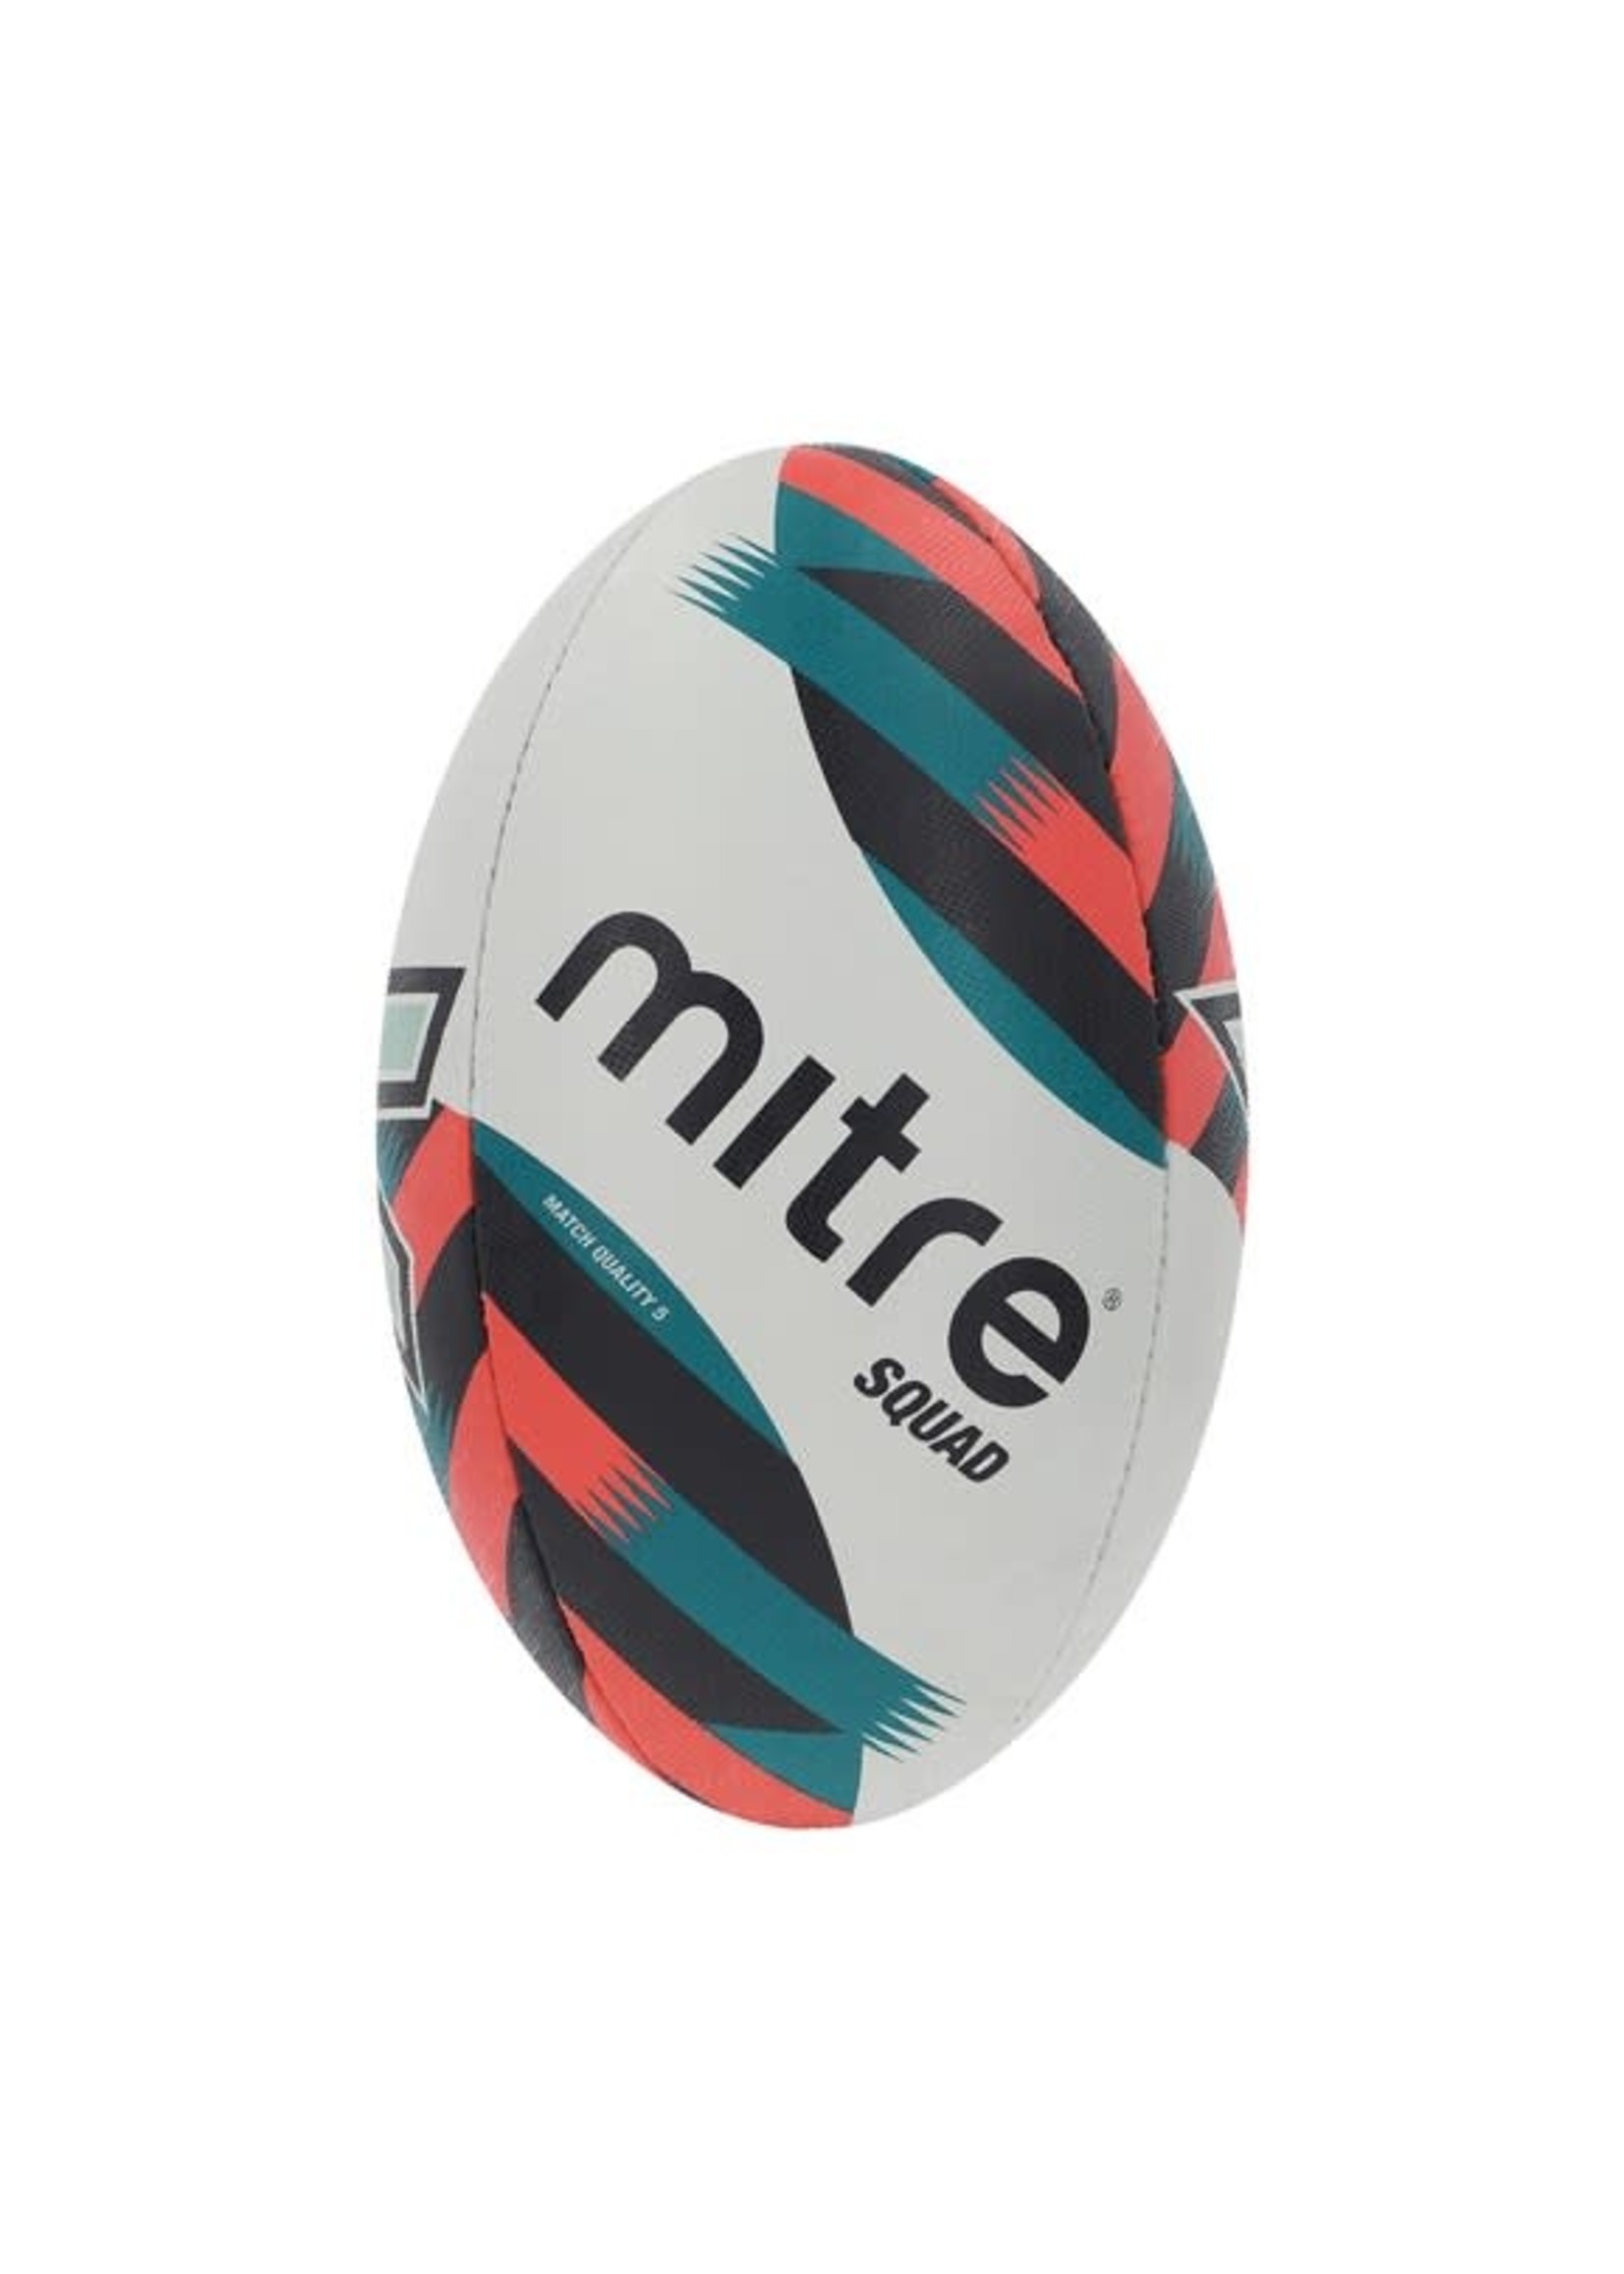 Mitre Mitre Squad Rugby Ball, Green/Orange